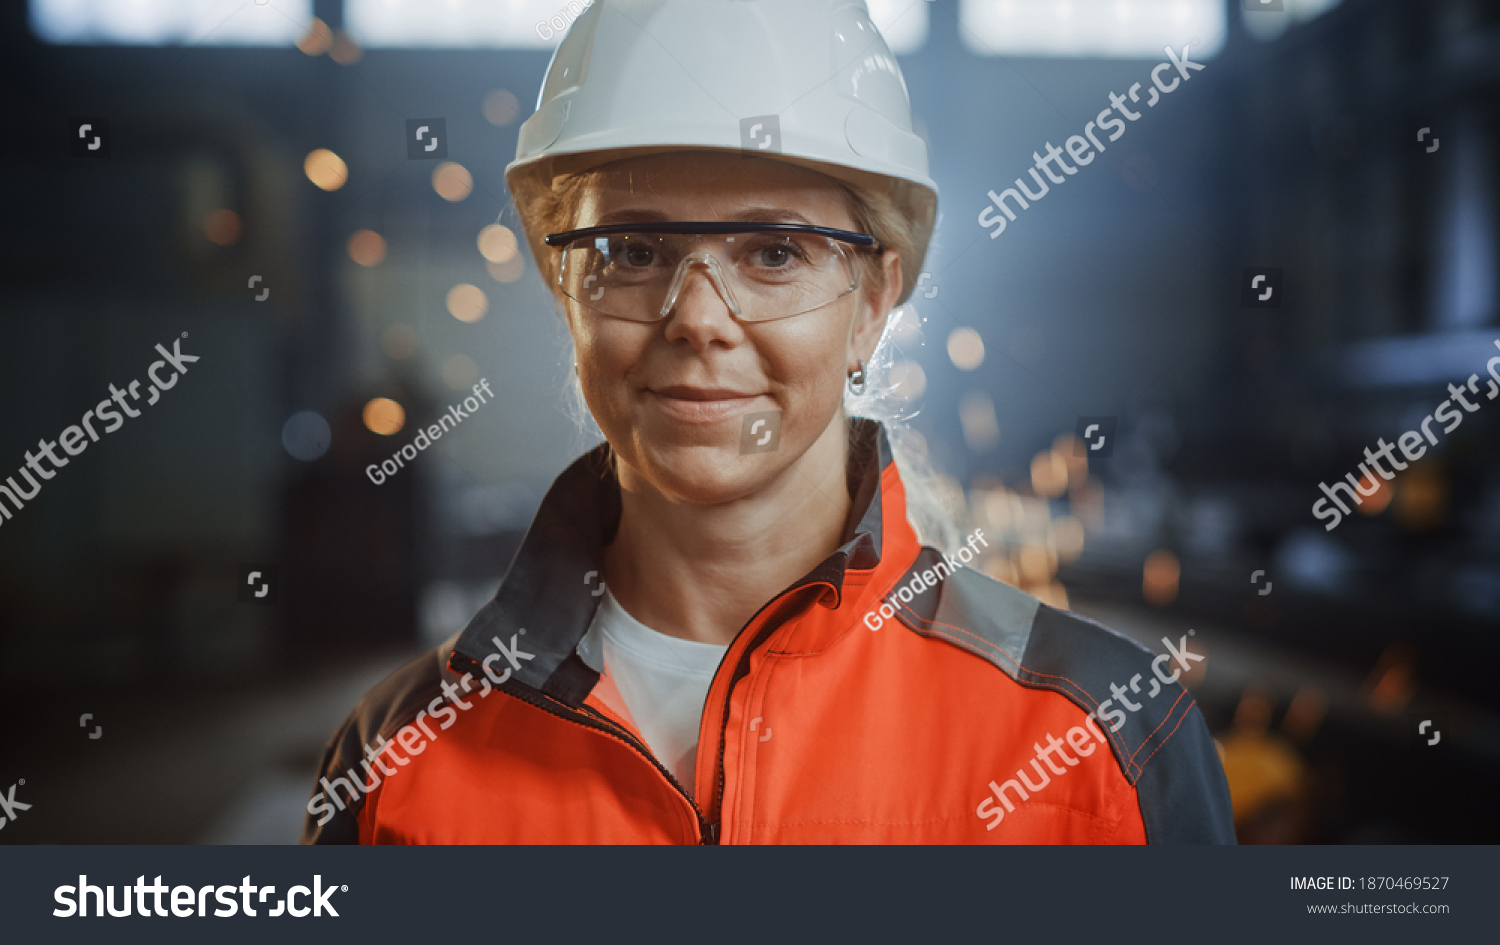 Portrait of a Professional Heavy Industry Engineer Worker Wearing Uniform, Glasses and Hard Hat in a Steel Factory. Beautiful Female Industrial Specialist Standing in Metal Construction Facility. #1870469527